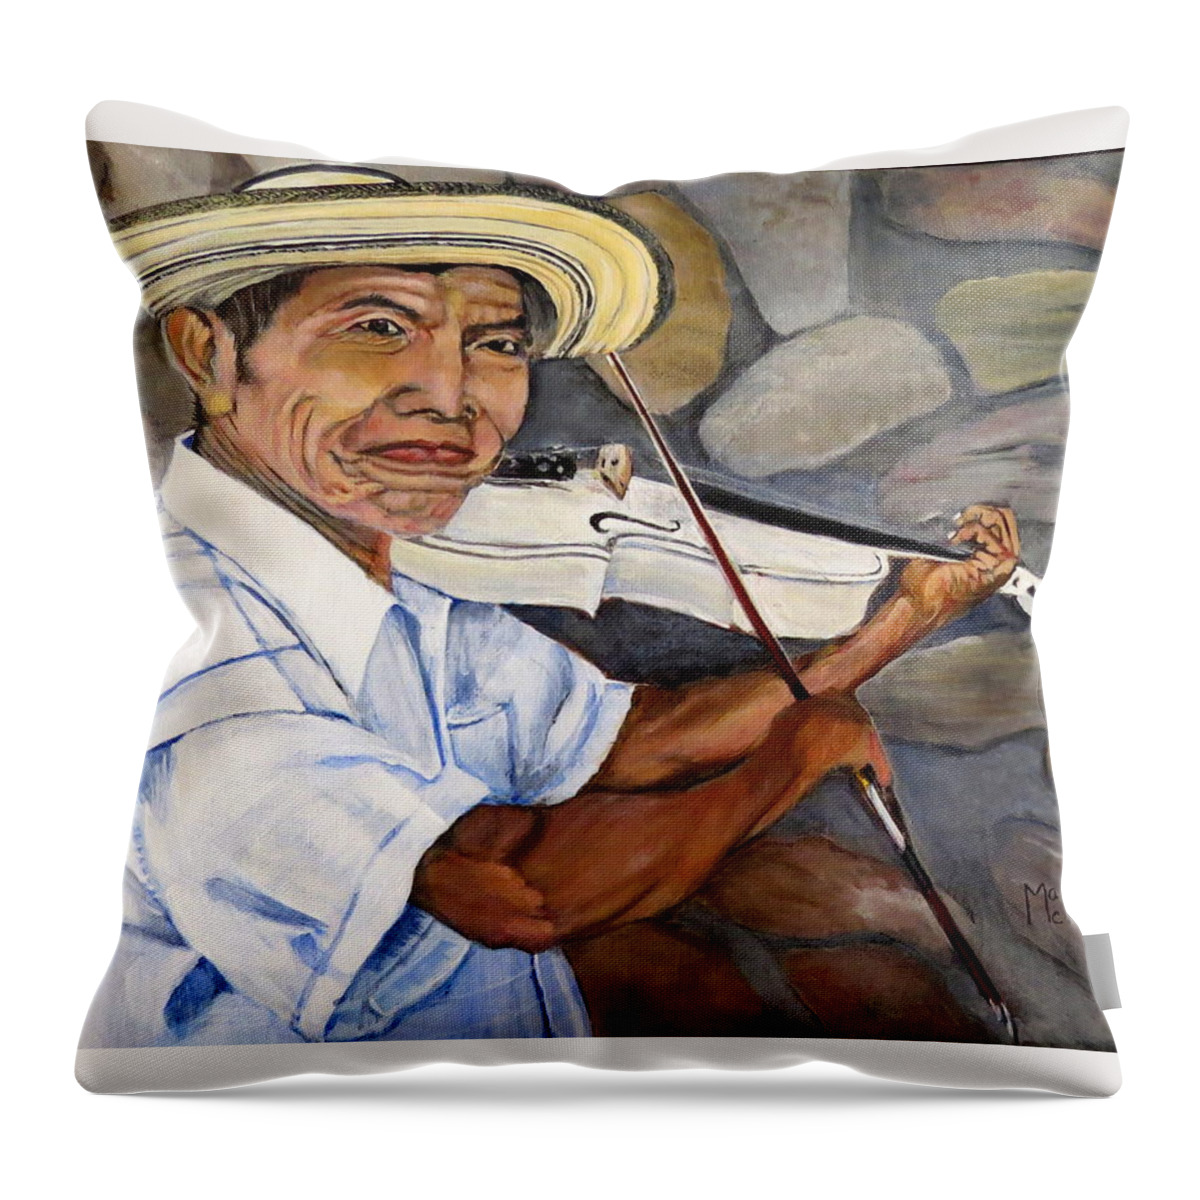 Fiddle Throw Pillow featuring the painting Mountain Fiddler by Marilyn McNish